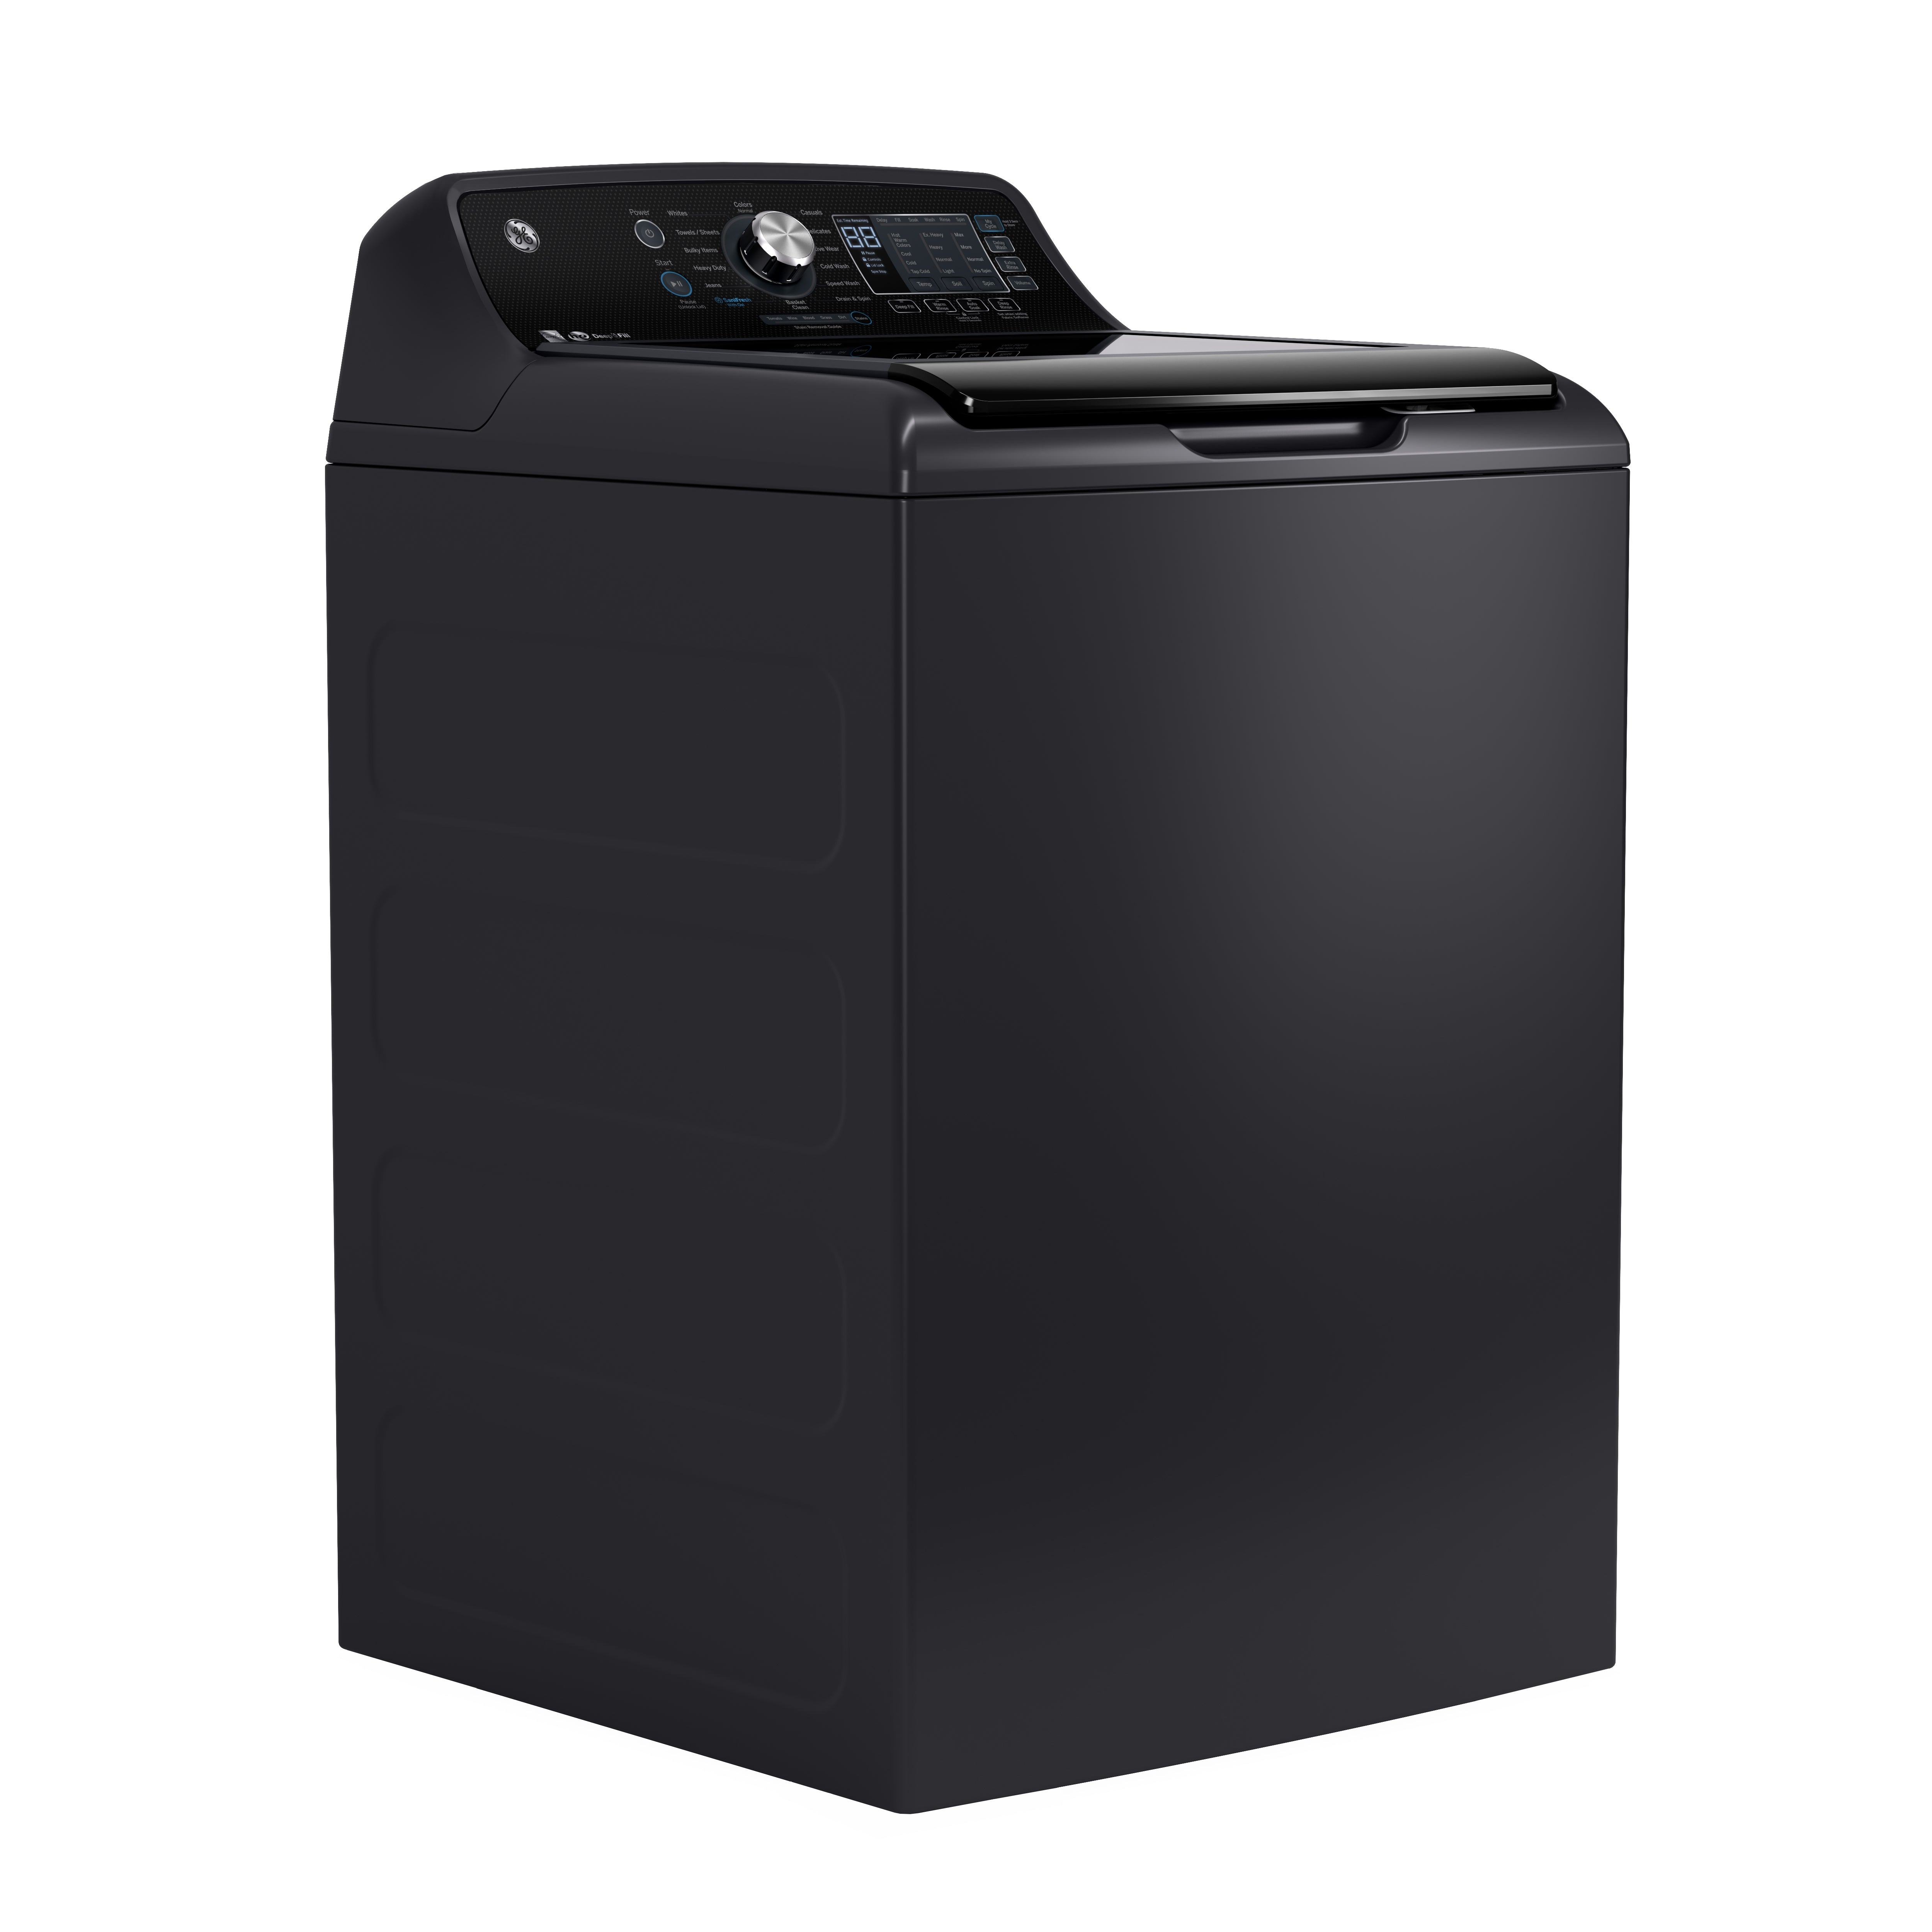 GE - 5.3 cu. Ft  Top Load Washer in Grey - GTW690BMTDG